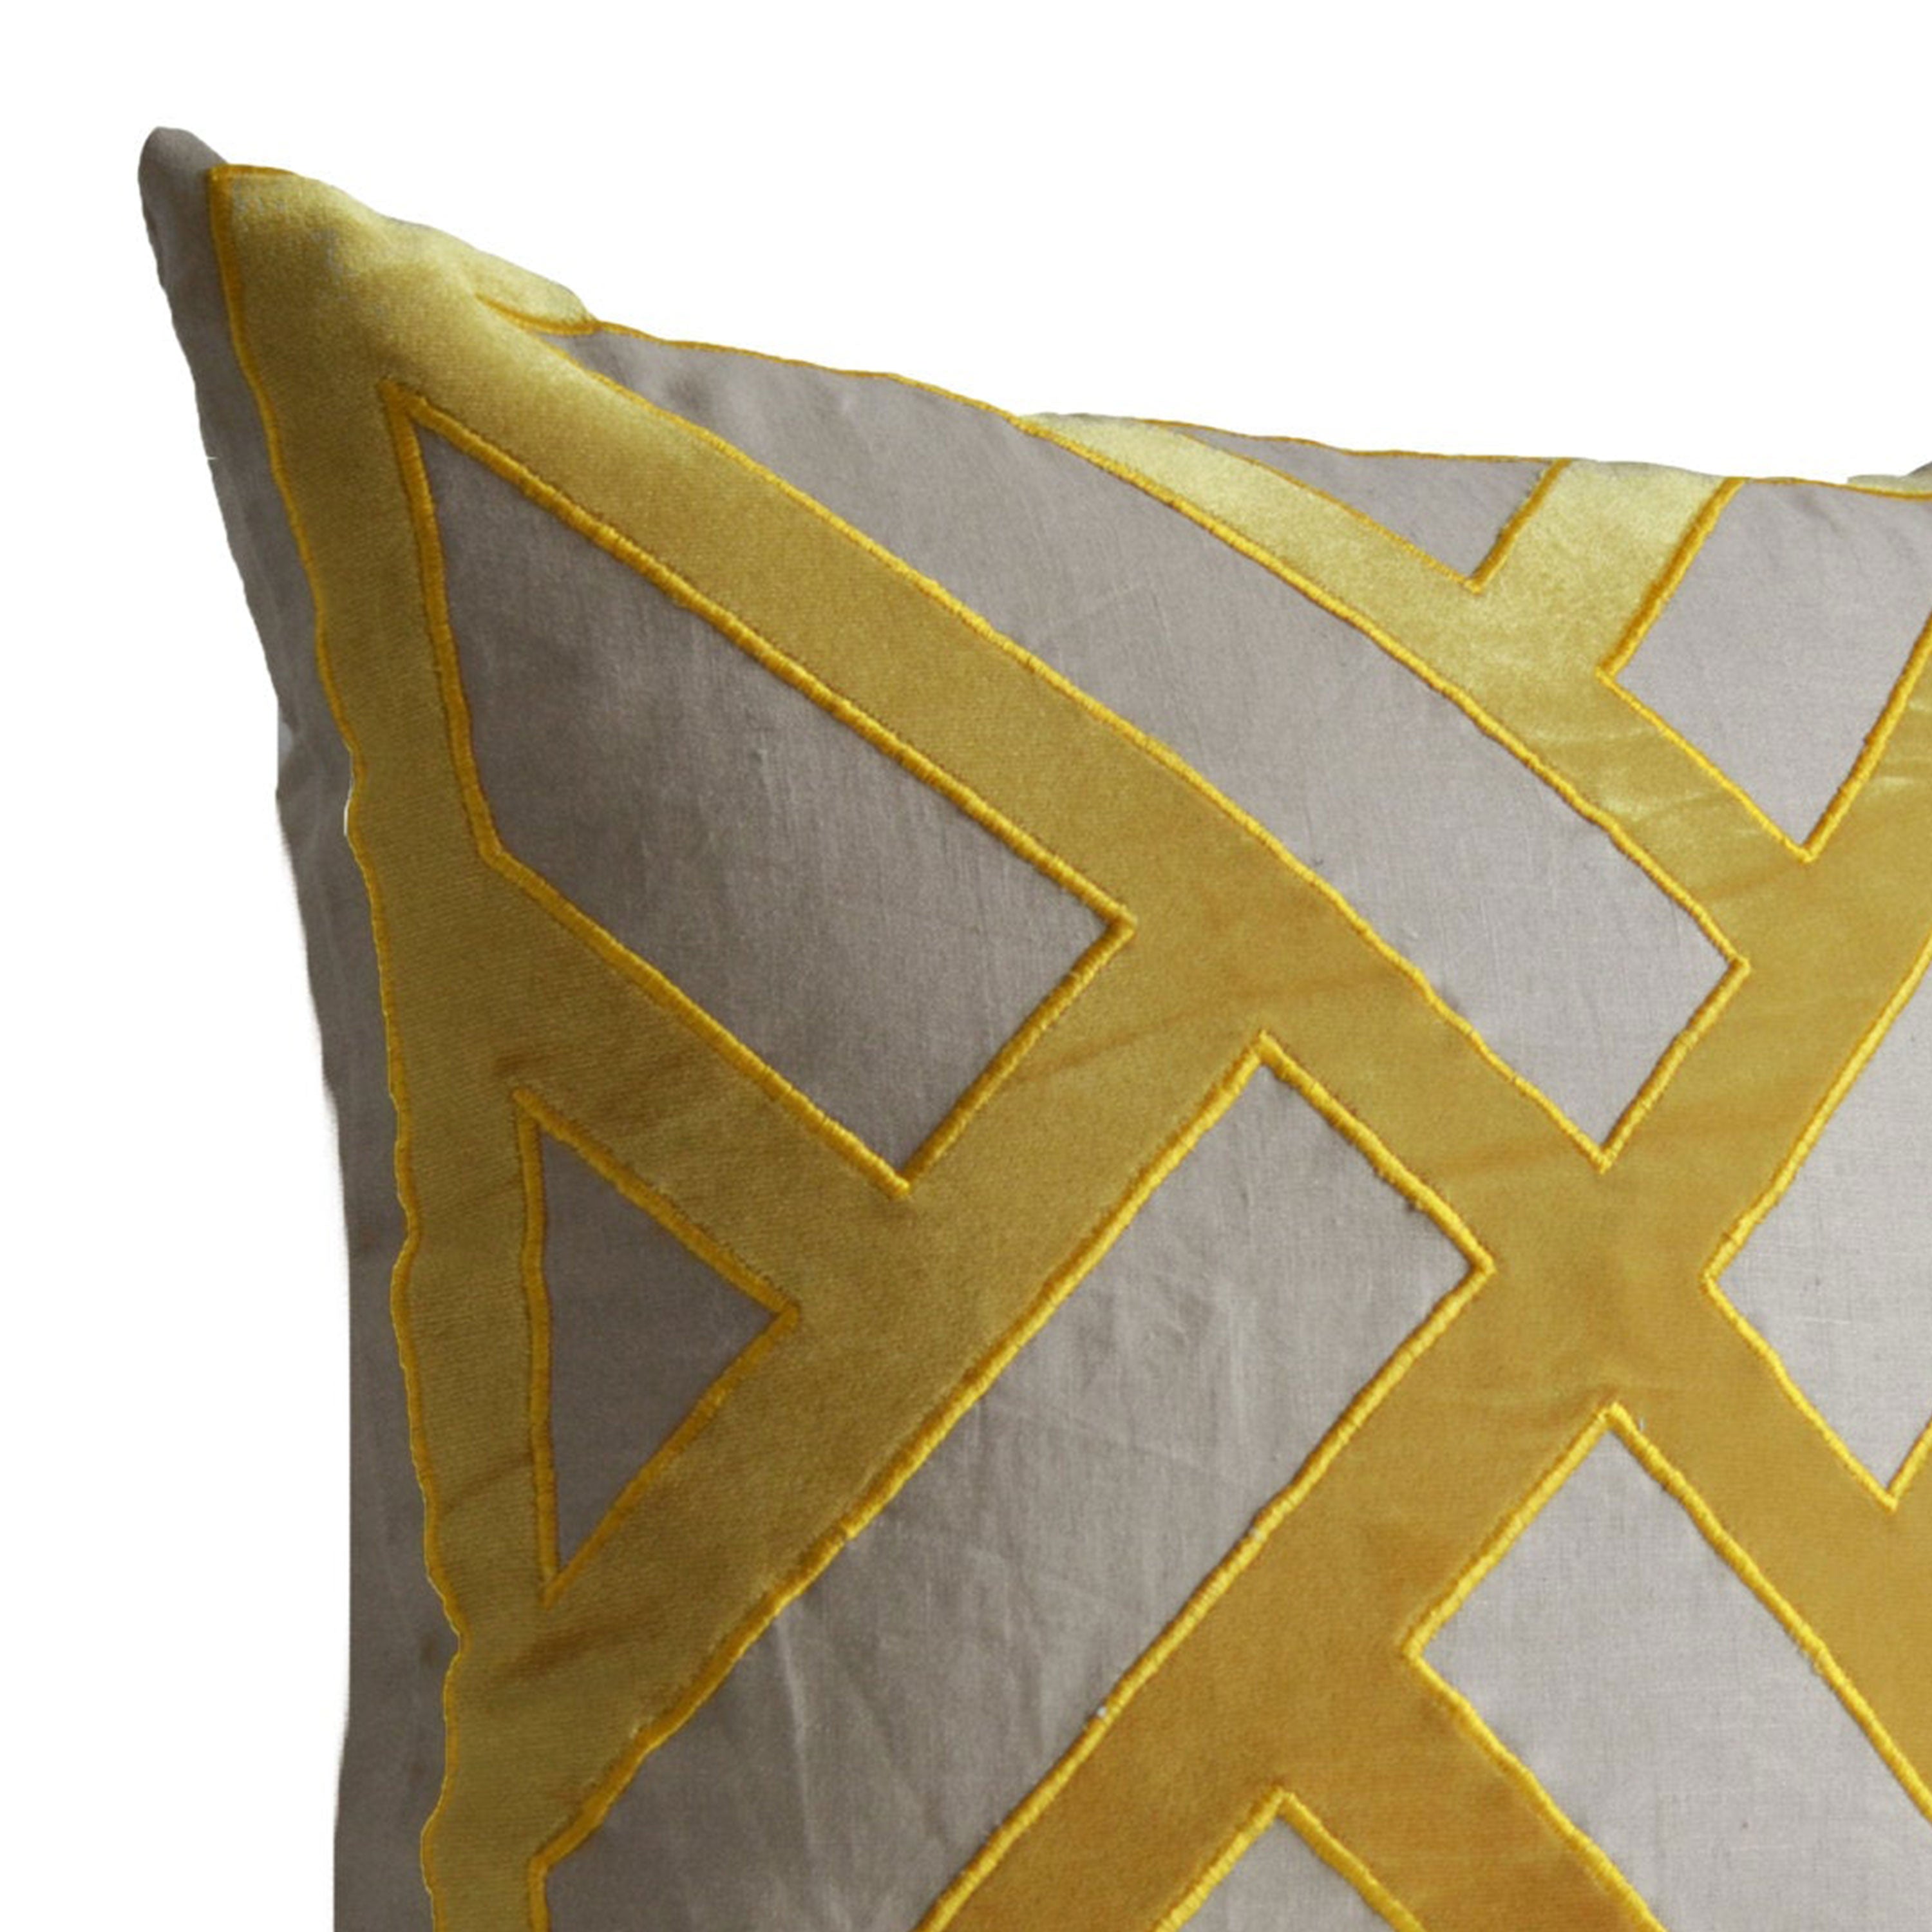 Yellow Gray Chippendale Pillow Cover